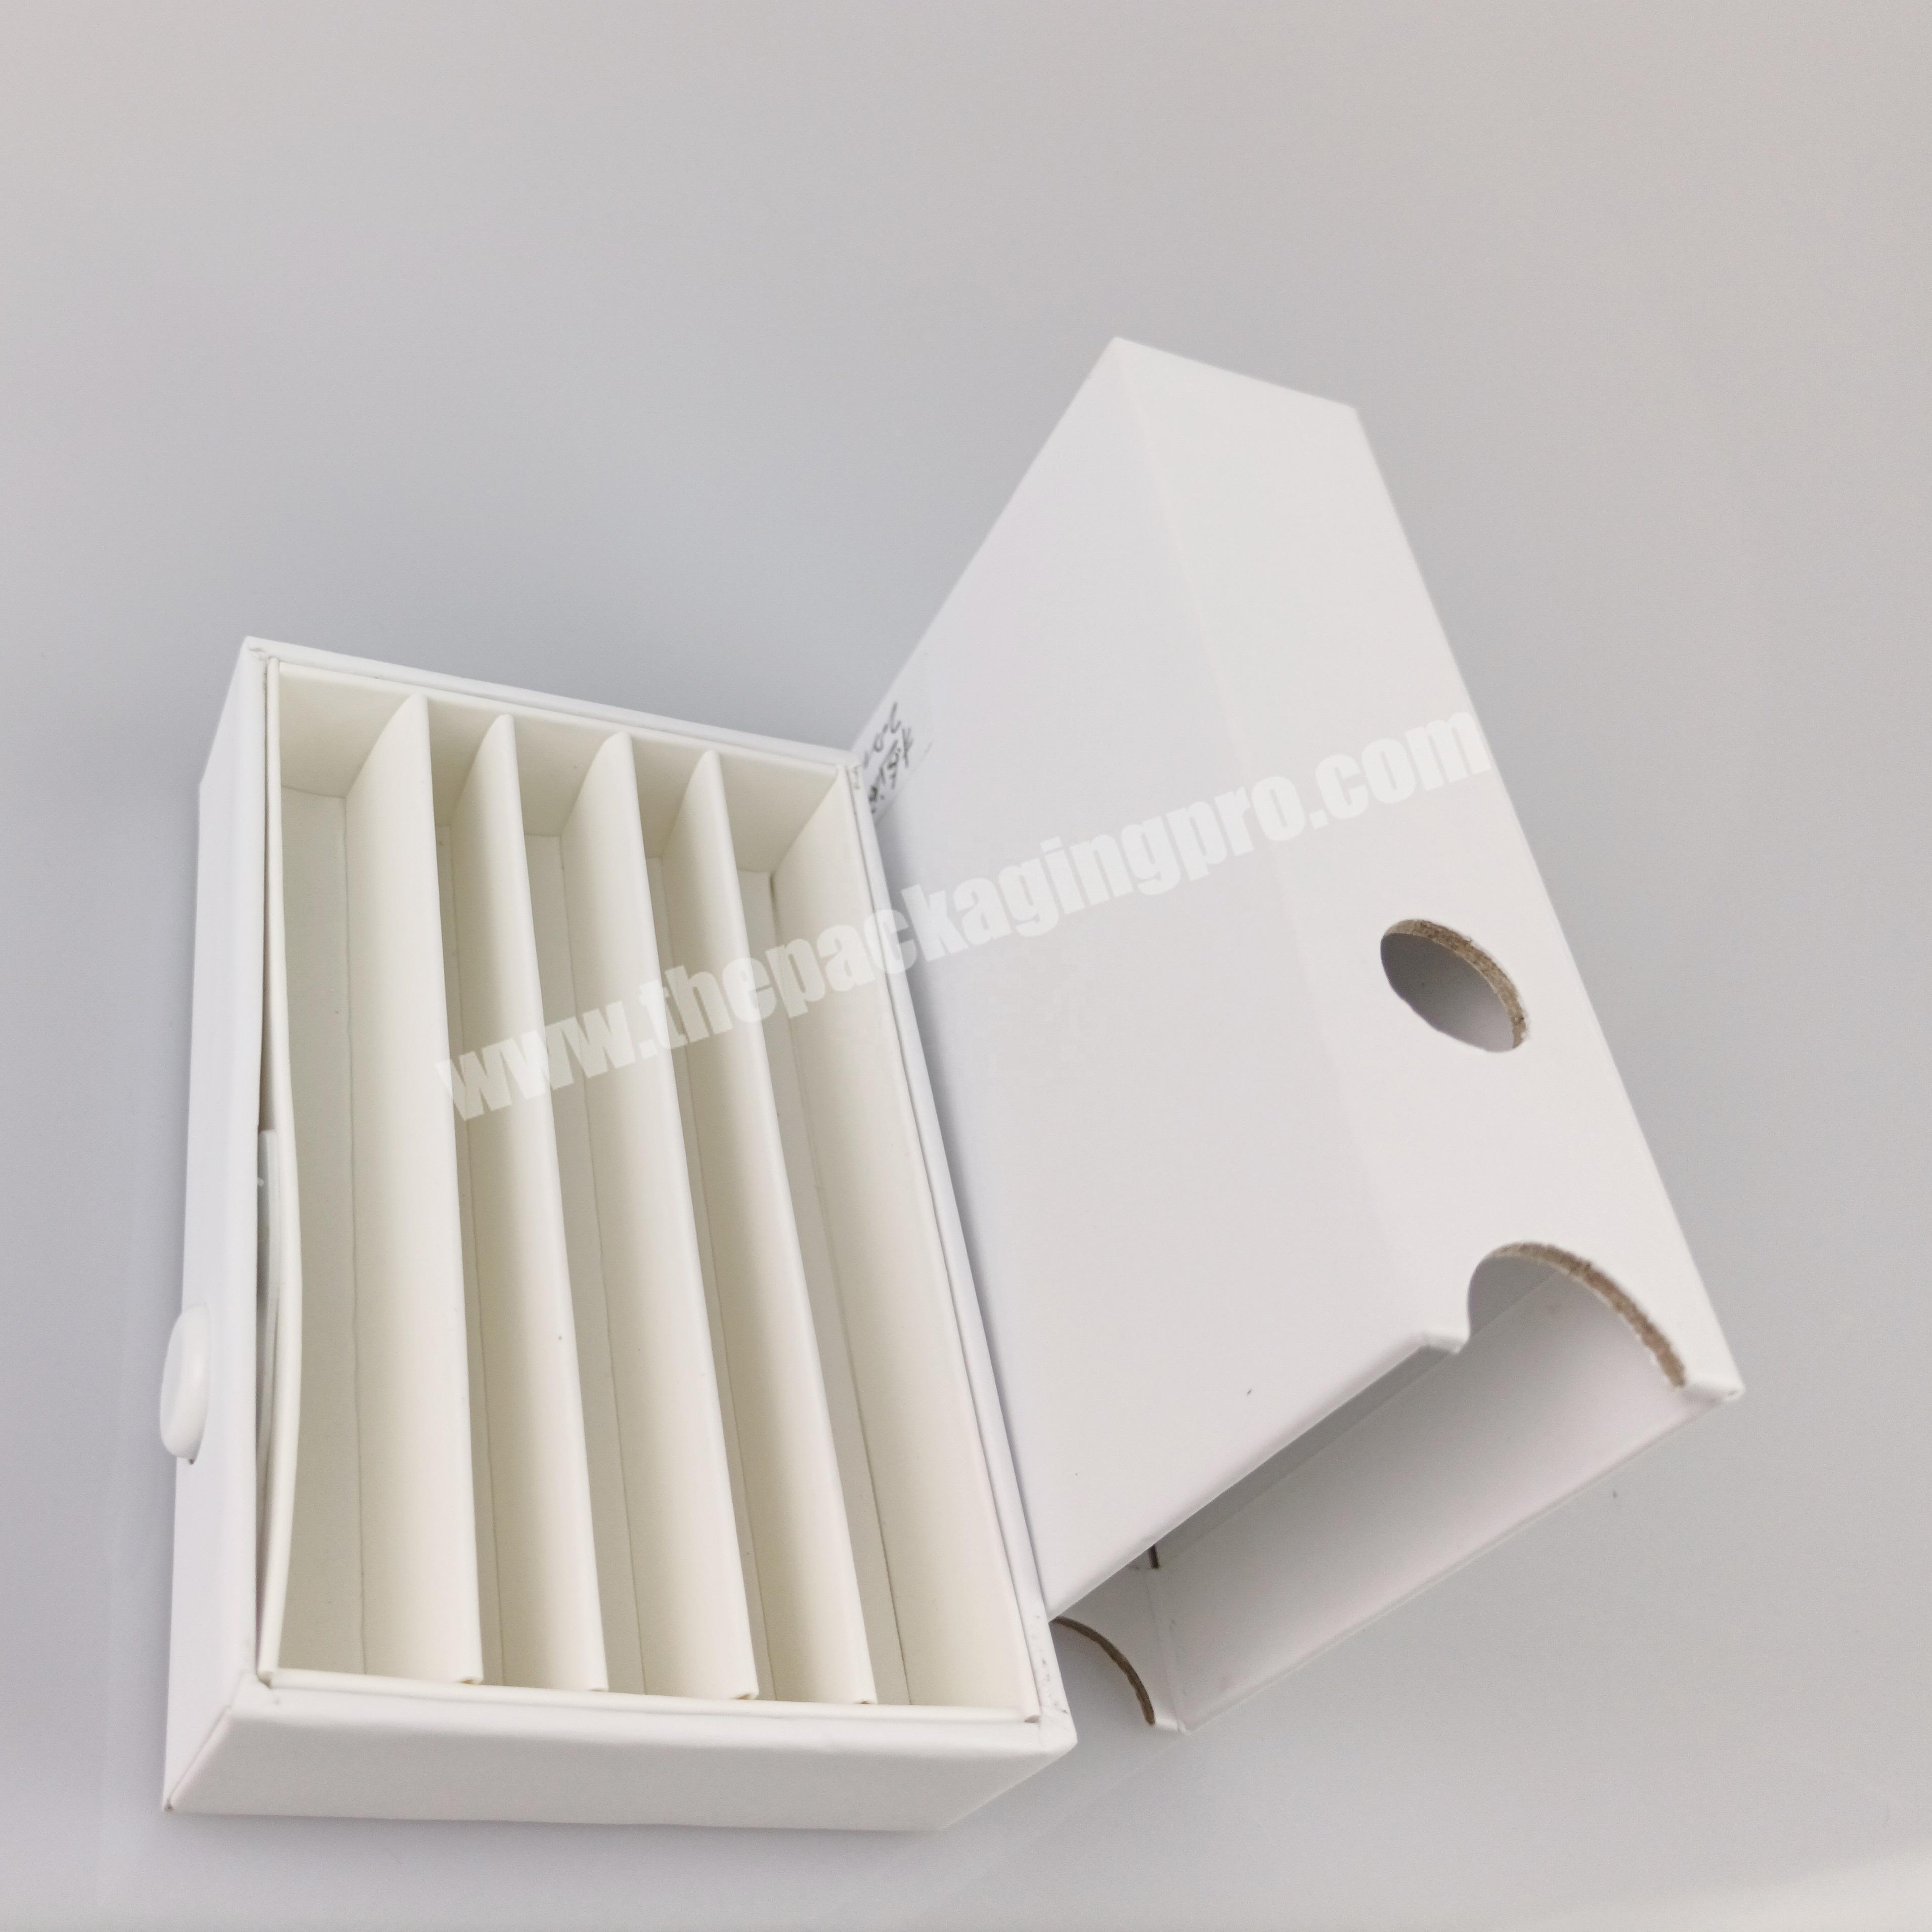 Custom Printed Cardboard Cigarette Packaging  Child Resistant 5 Pre Rolls Joint Packaging Box with Divider Section